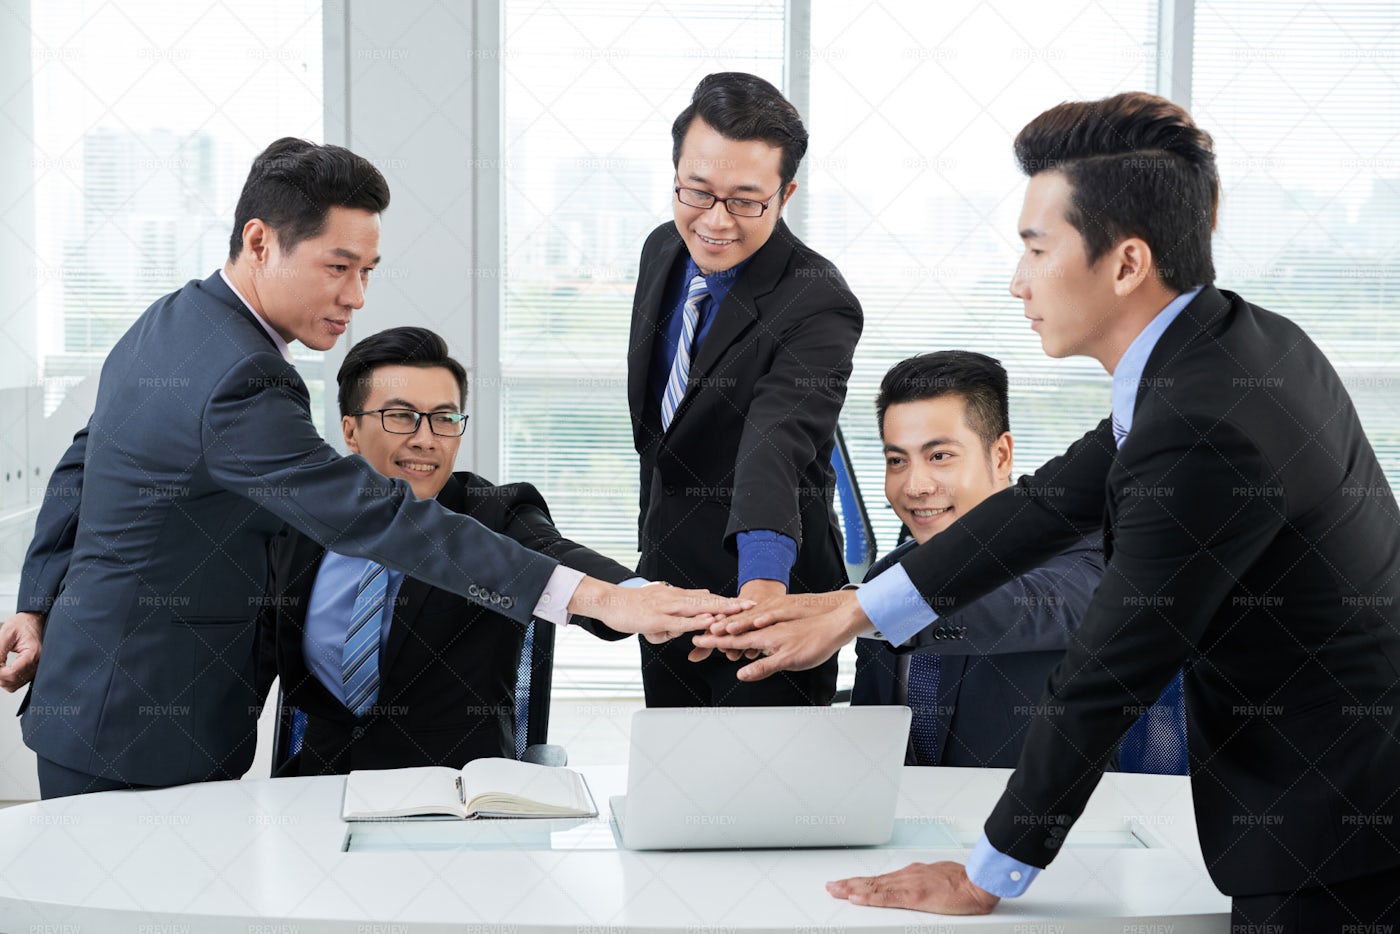 Working Meeting Of Asian Colleagues: Stock Photos